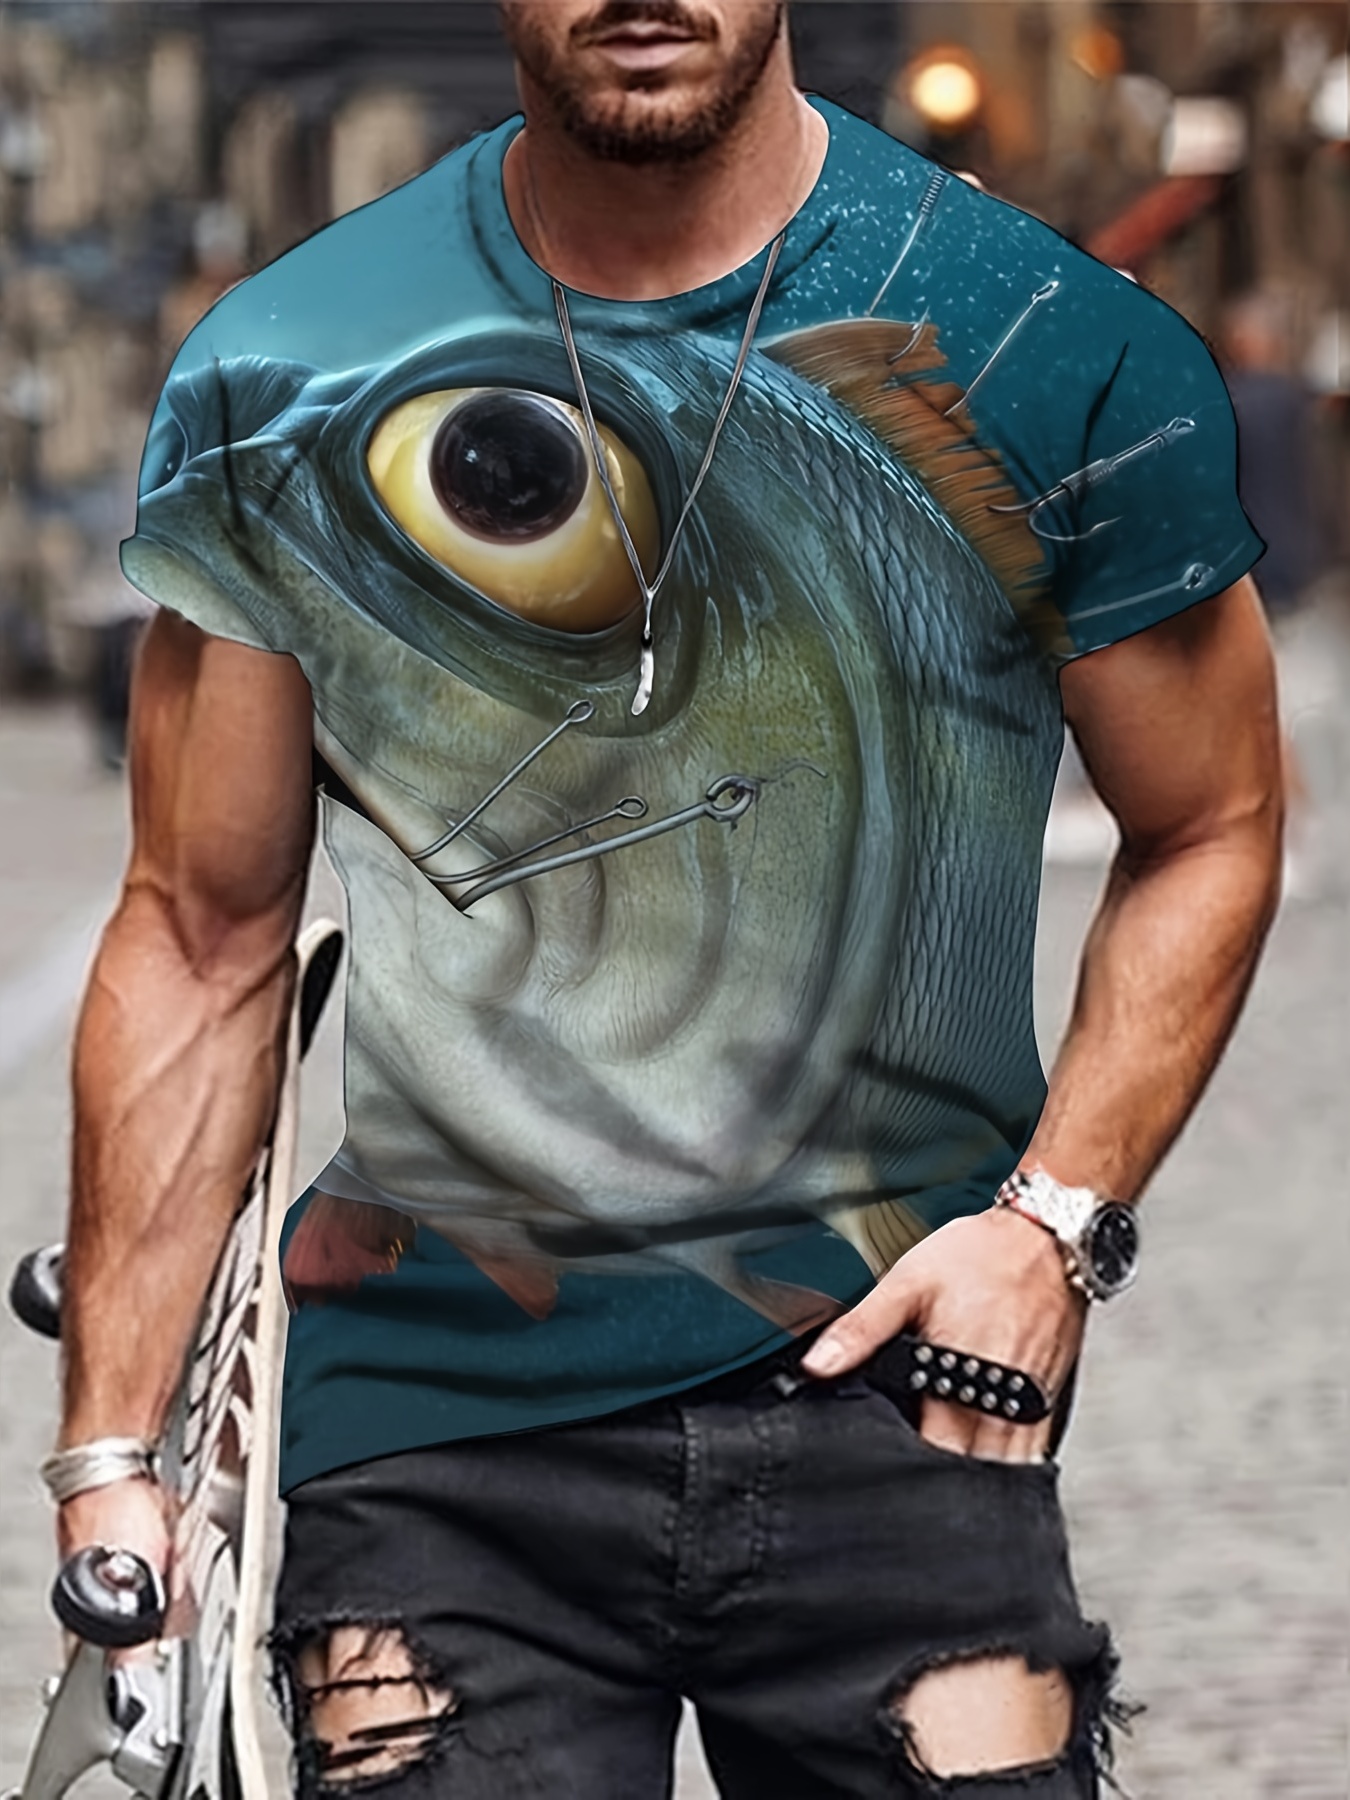 3D Fish Print, Men's Graphic Design Crew Neck Novel T-Shirt, Casual Comfy Tees Tshirts For Summer, Men's Clothing Tops For Daily Vacation Resorts